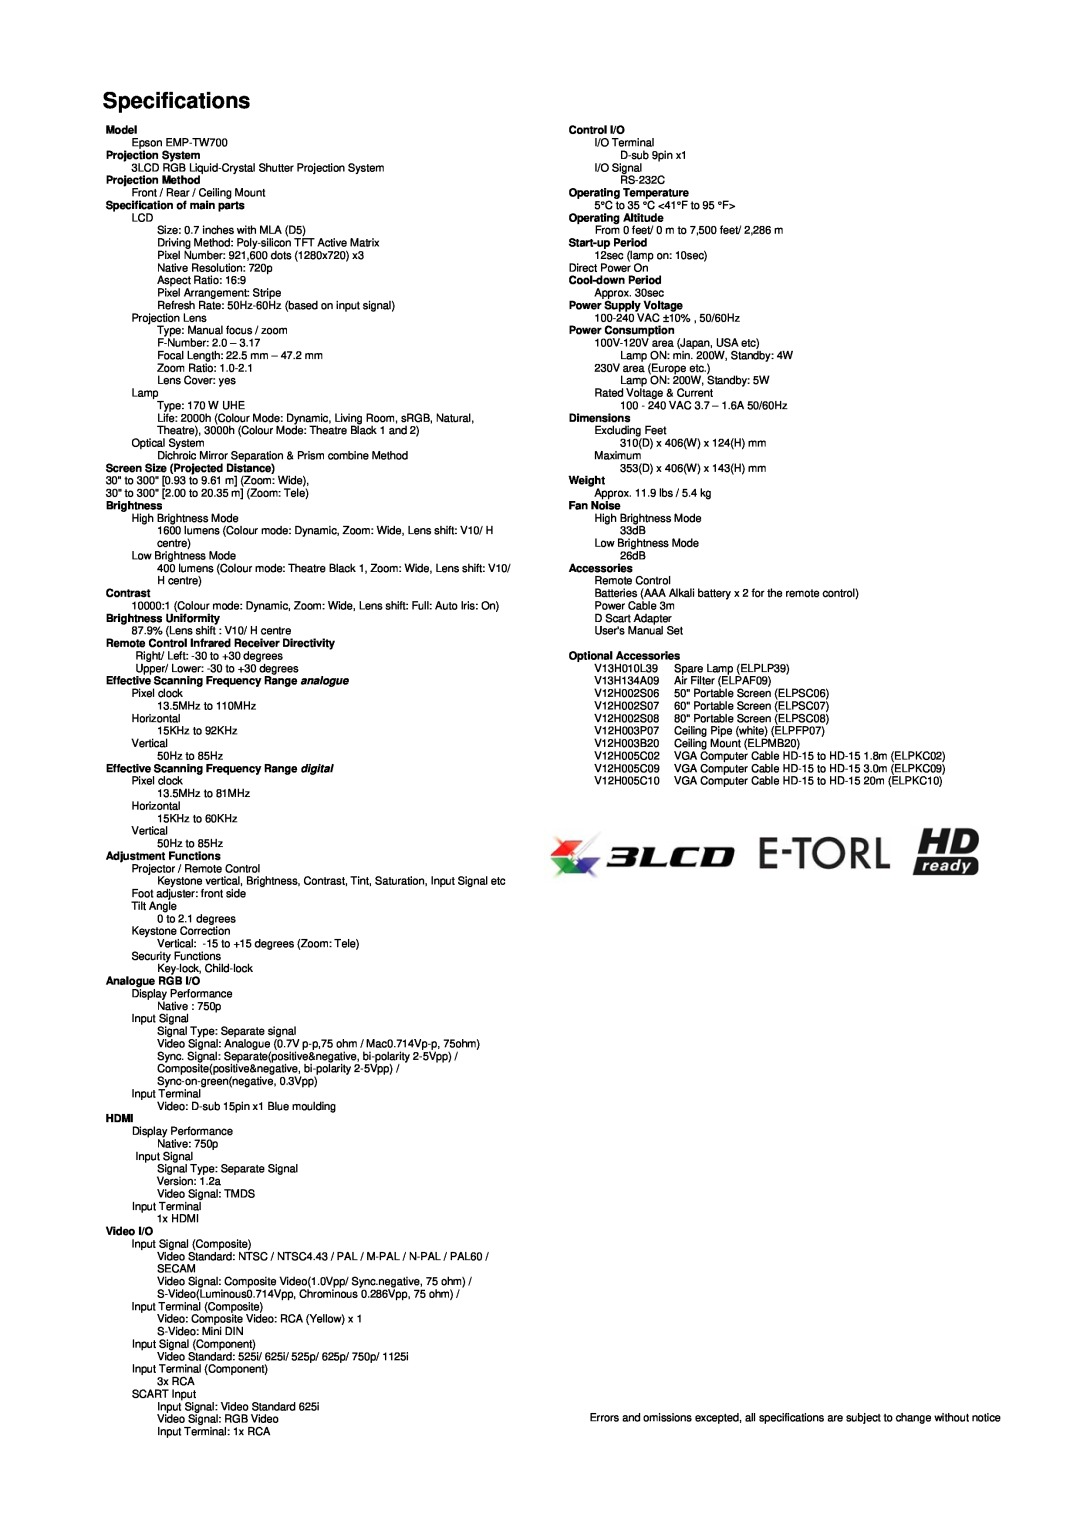 Epson EMP-TW700 dimensions Specifications 